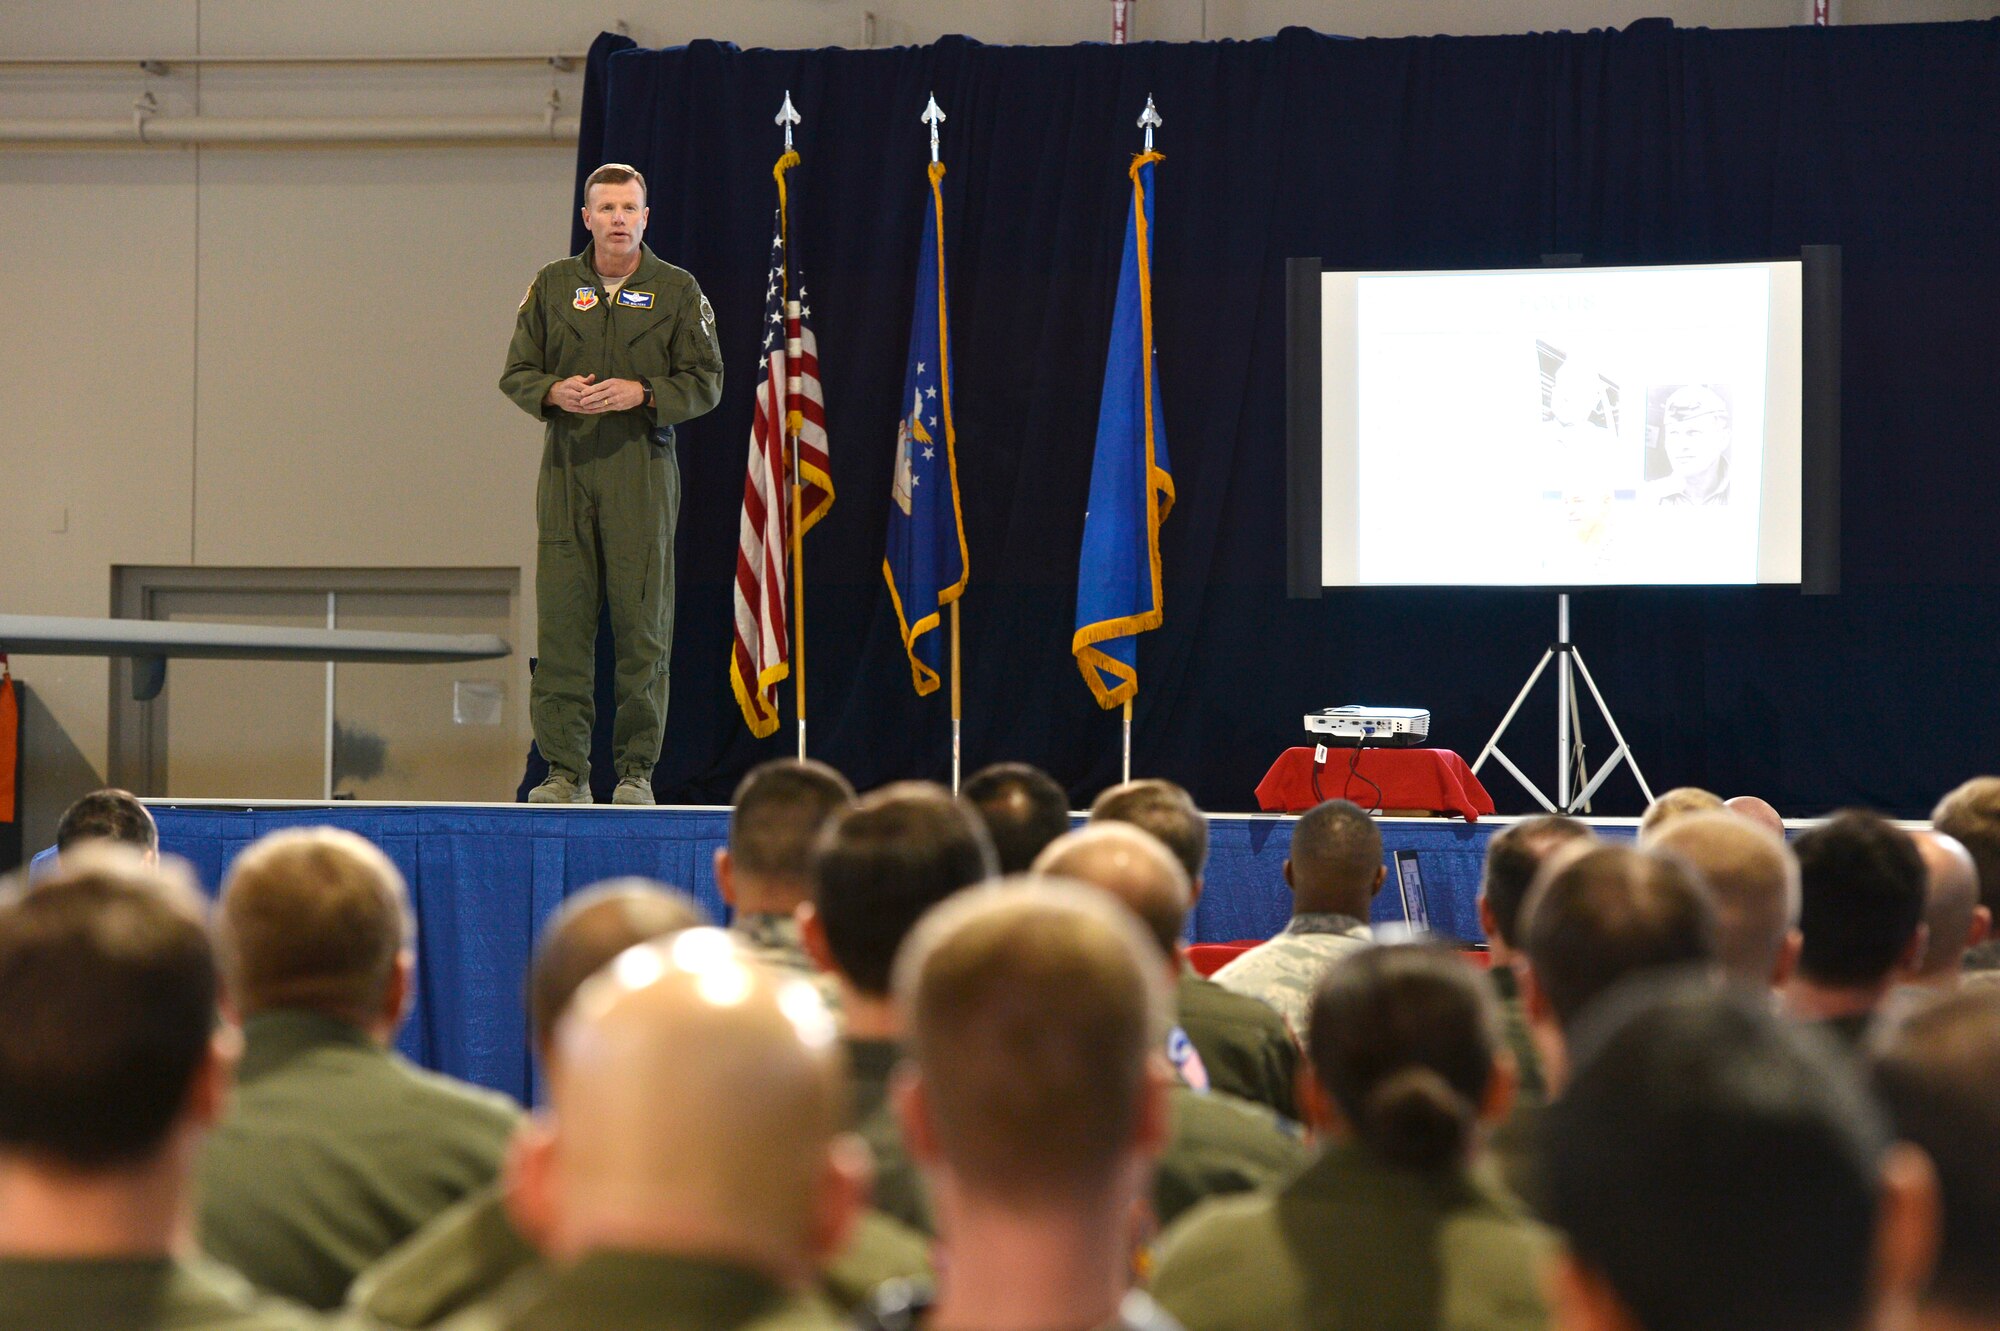 Lt. Gen. Tod D. Wolters, 12th Air Force (Air Forces Southern) commander, shares his views of today’s Air Force environment with Airmen of the 432nd Wing/432nd Air Expeditionary Wing during his all-call while on a two-day visit Jan. 13-14. Wolters discussed issues affecting Airmen such as teamwork, sexual assault prevention and suicide awareness. (U.S. Air Force photo by Staff Sgt. N.B.)